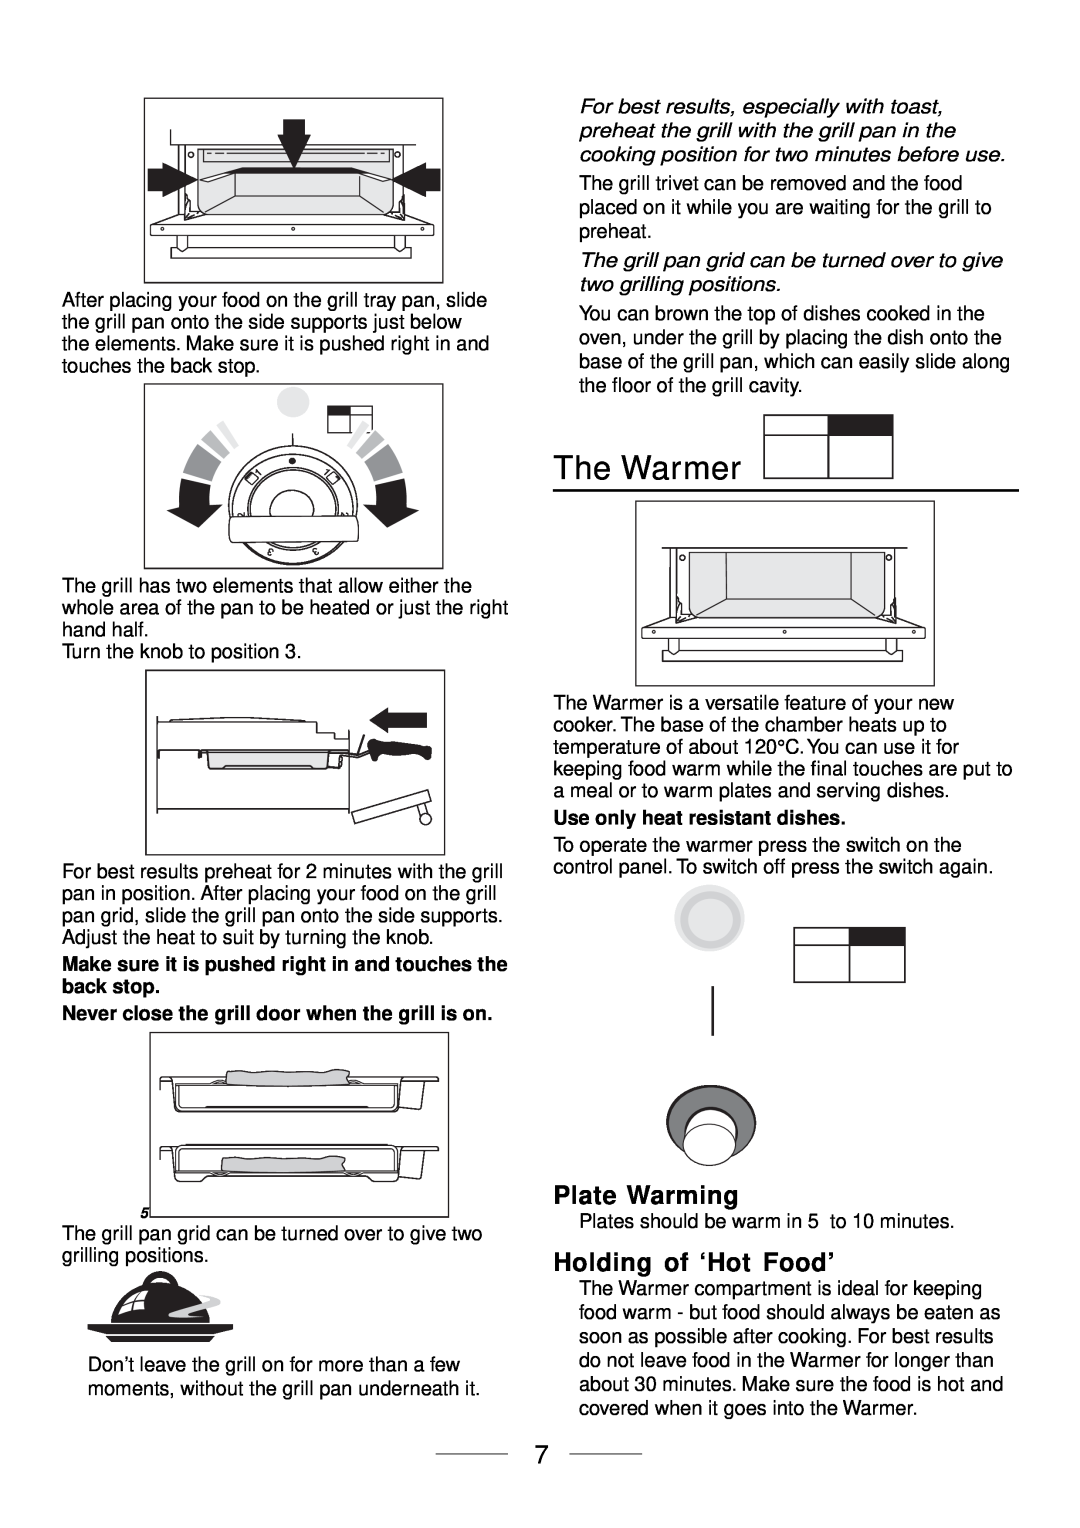 Maytag 110 installation instructions The Warmer, Plate Warming, Holding of ‘Hot Food’ 